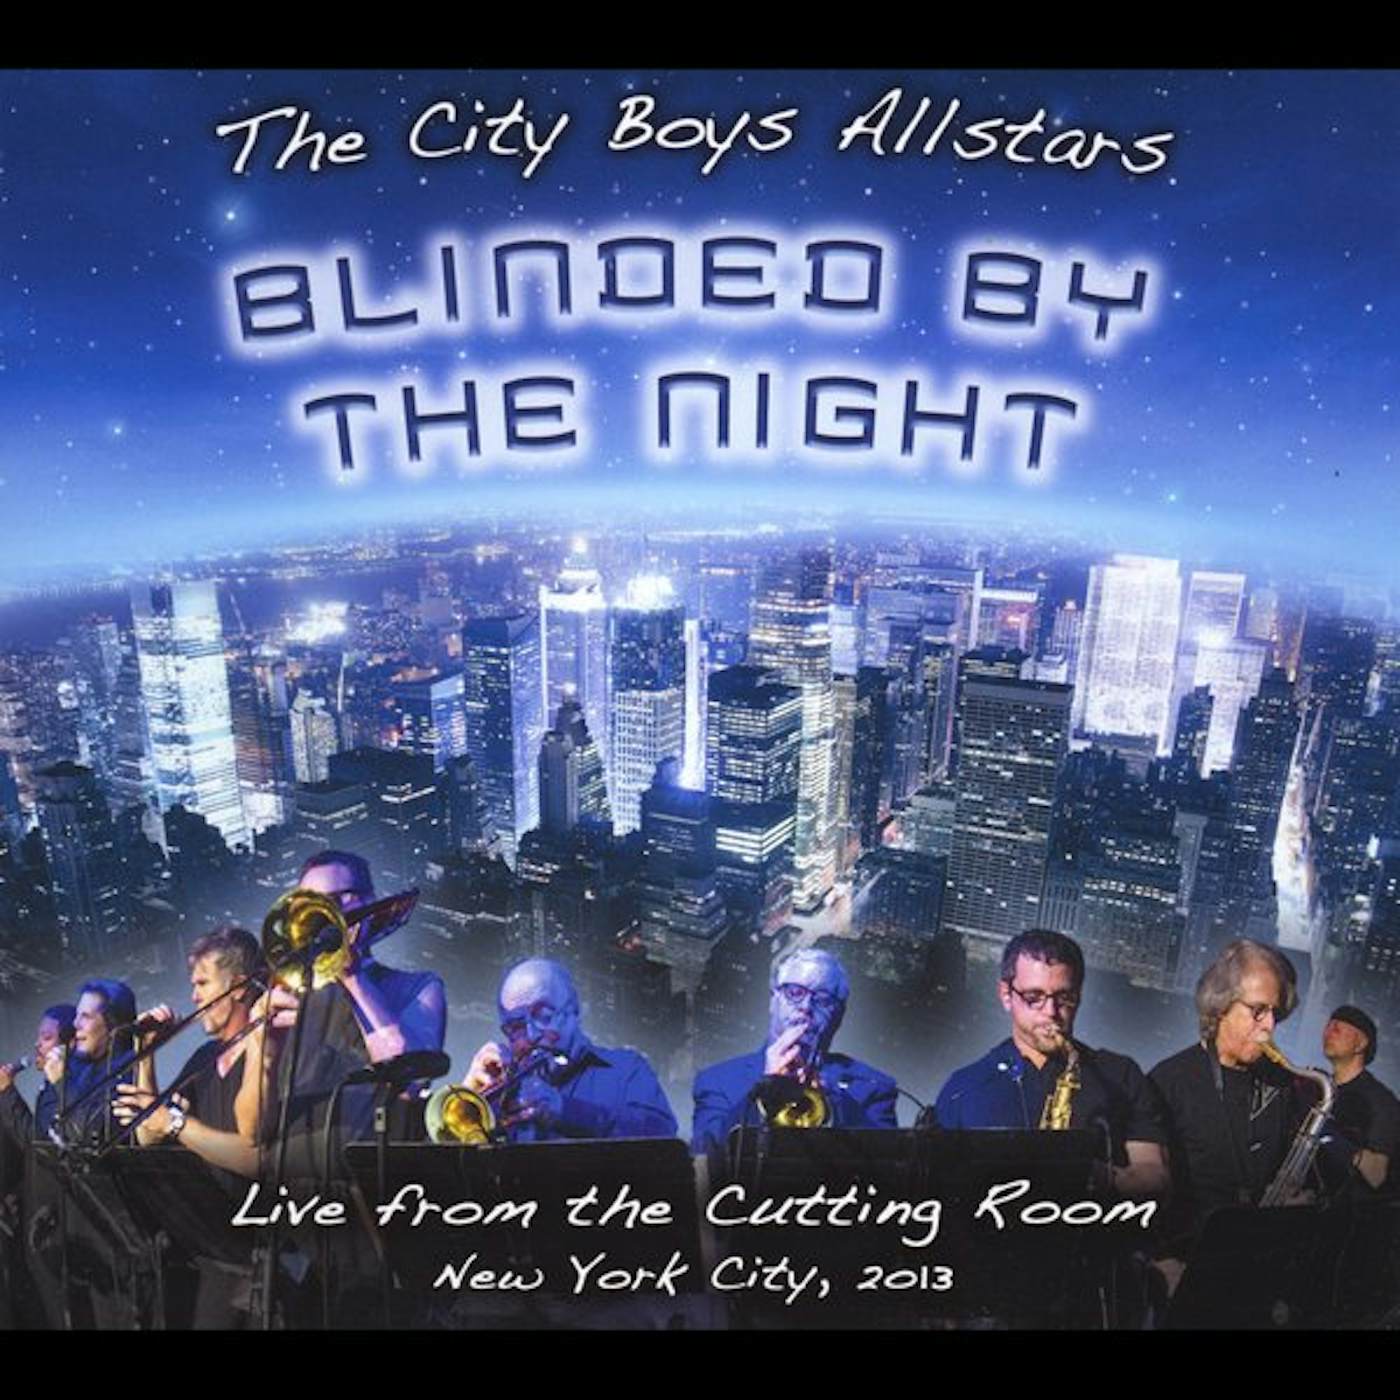 The City Boys Allstars BLINDED BY THE NIGHT Vinyl Record